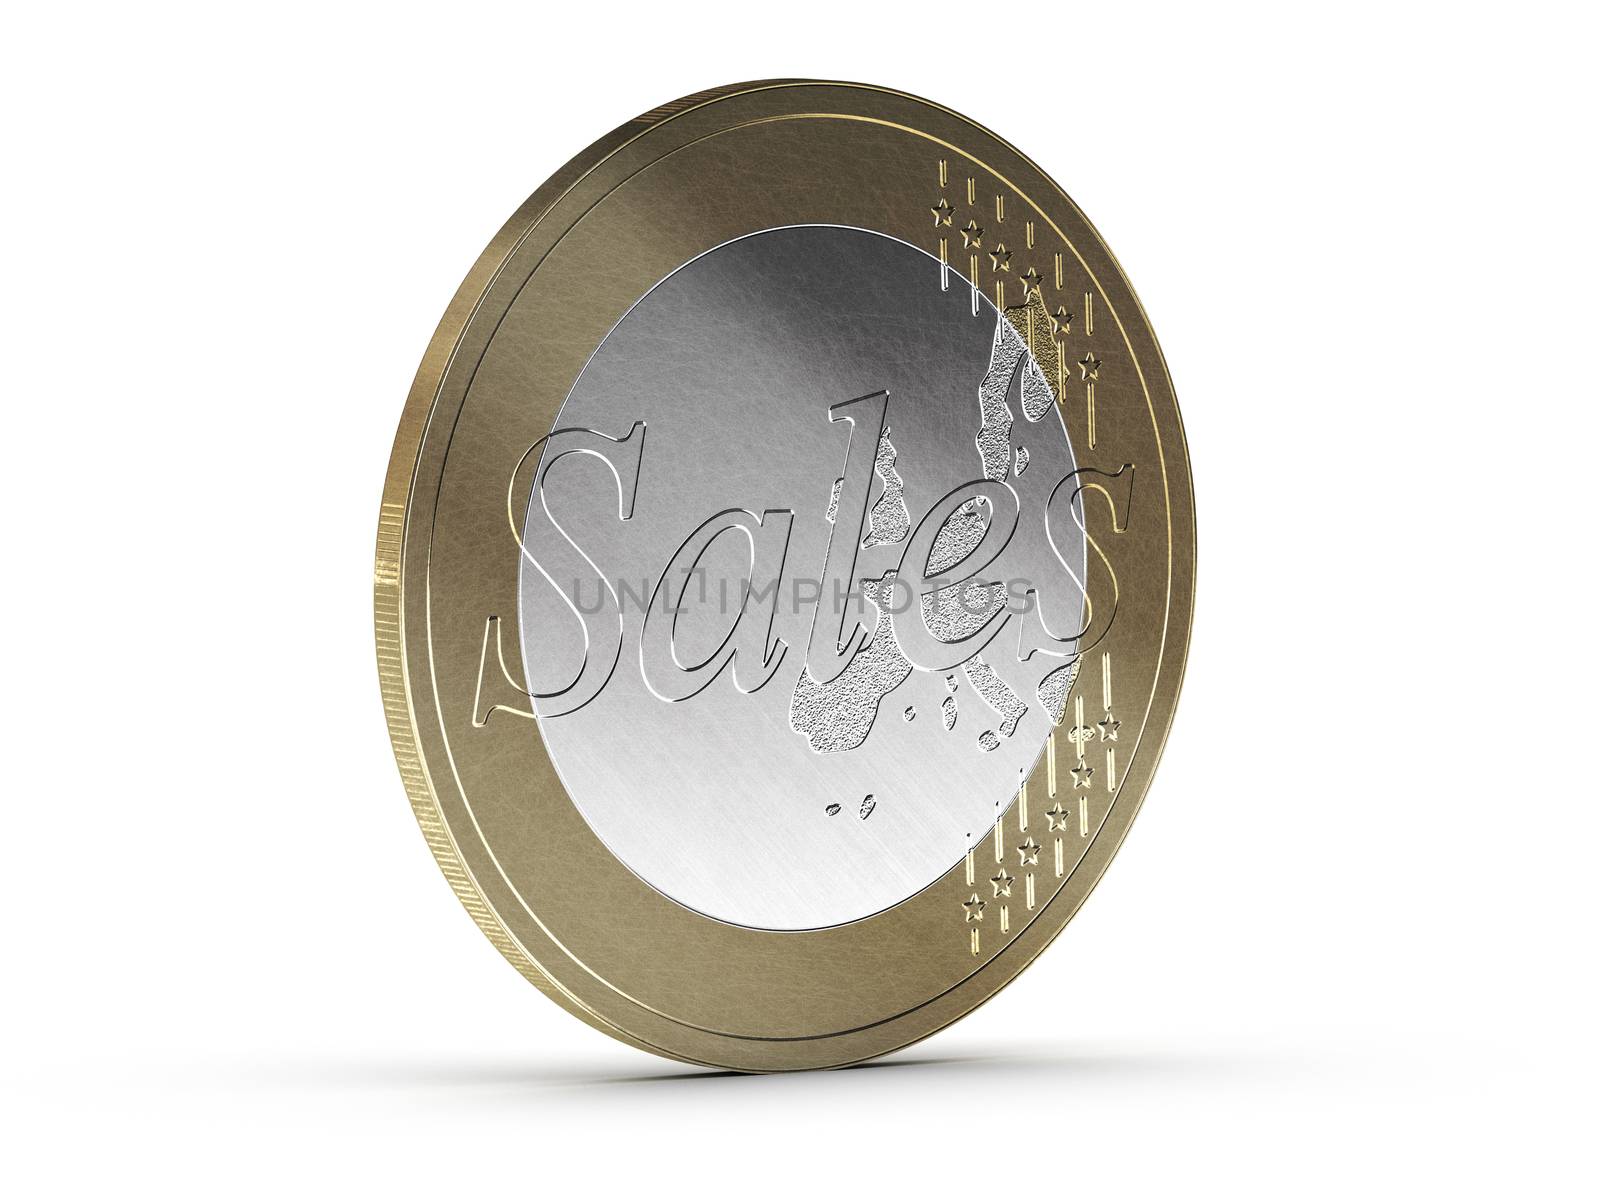 Sales euro coin over white background with shadow and scratches. Conceptual image for business incentive or motivation.